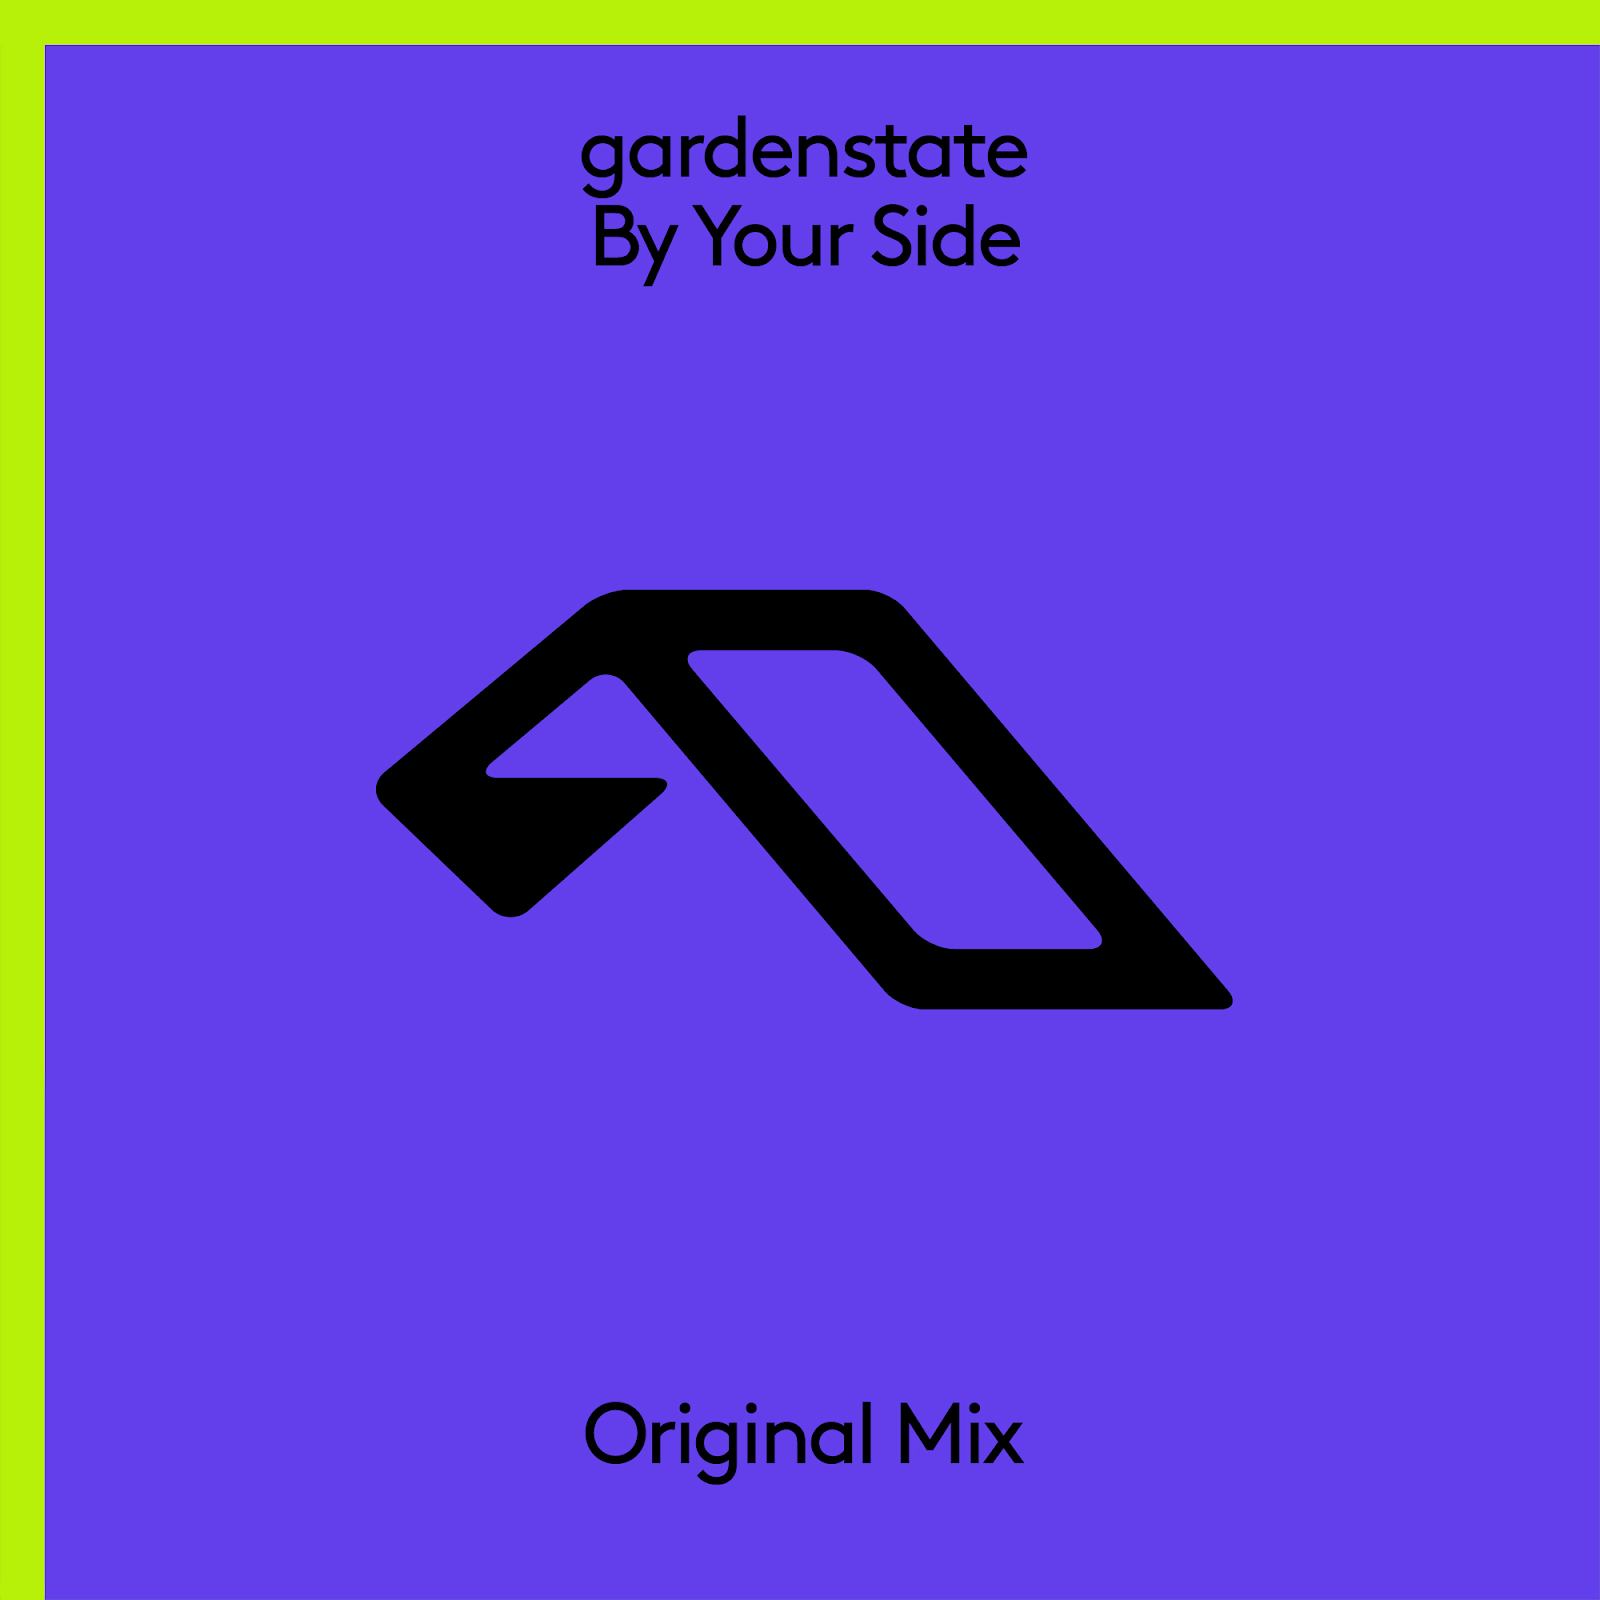 gardenstate presents By Your Side on Anjunabeats